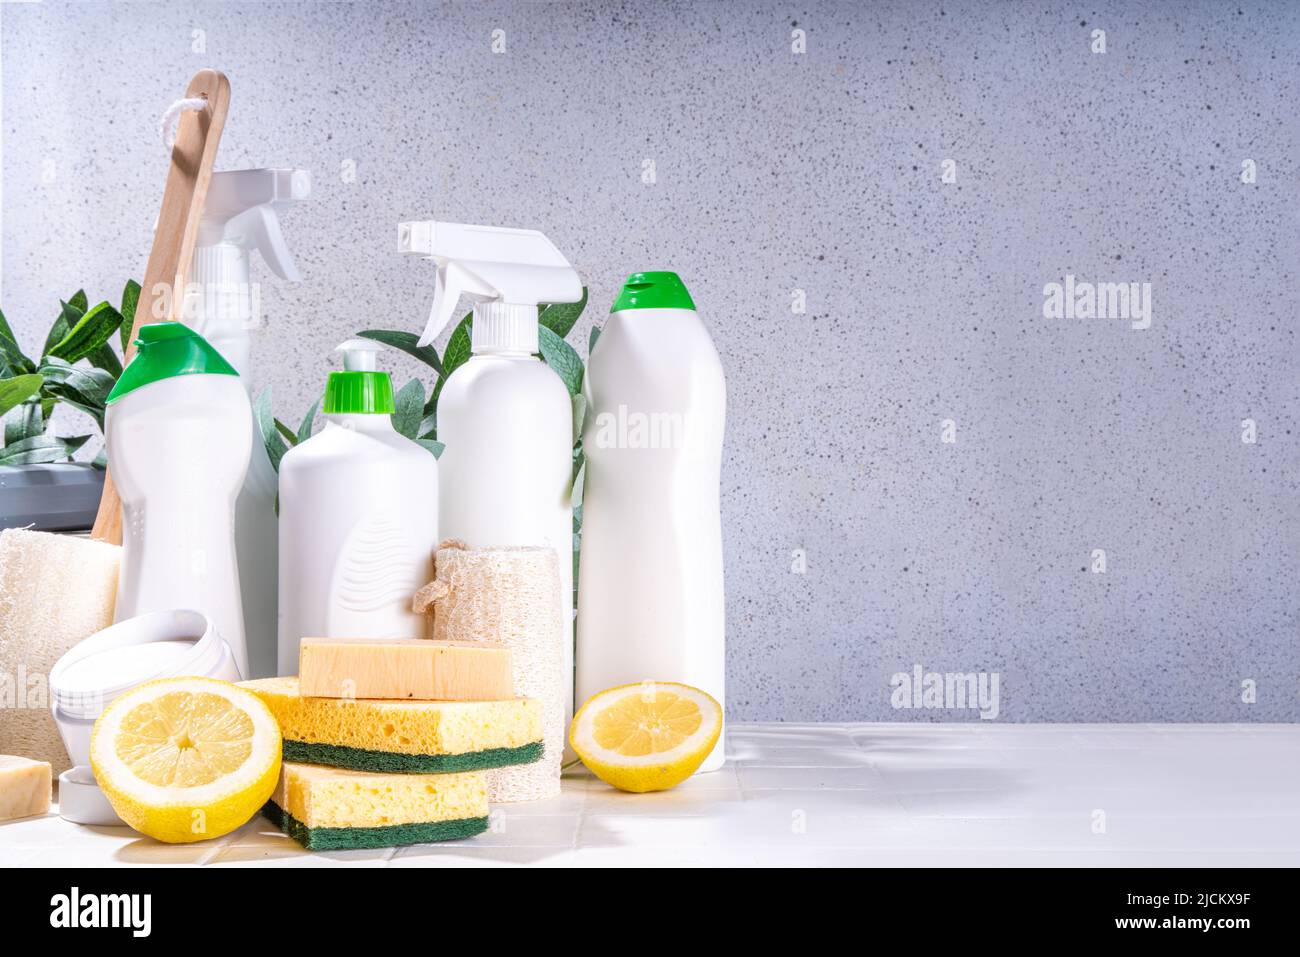 Eco friendly organic cleaning concept. Eco-friendly cleaner utensils - eco brushes, tools sponges, natural cleaning products, soda, soap, lemon, vineg Stock Photo